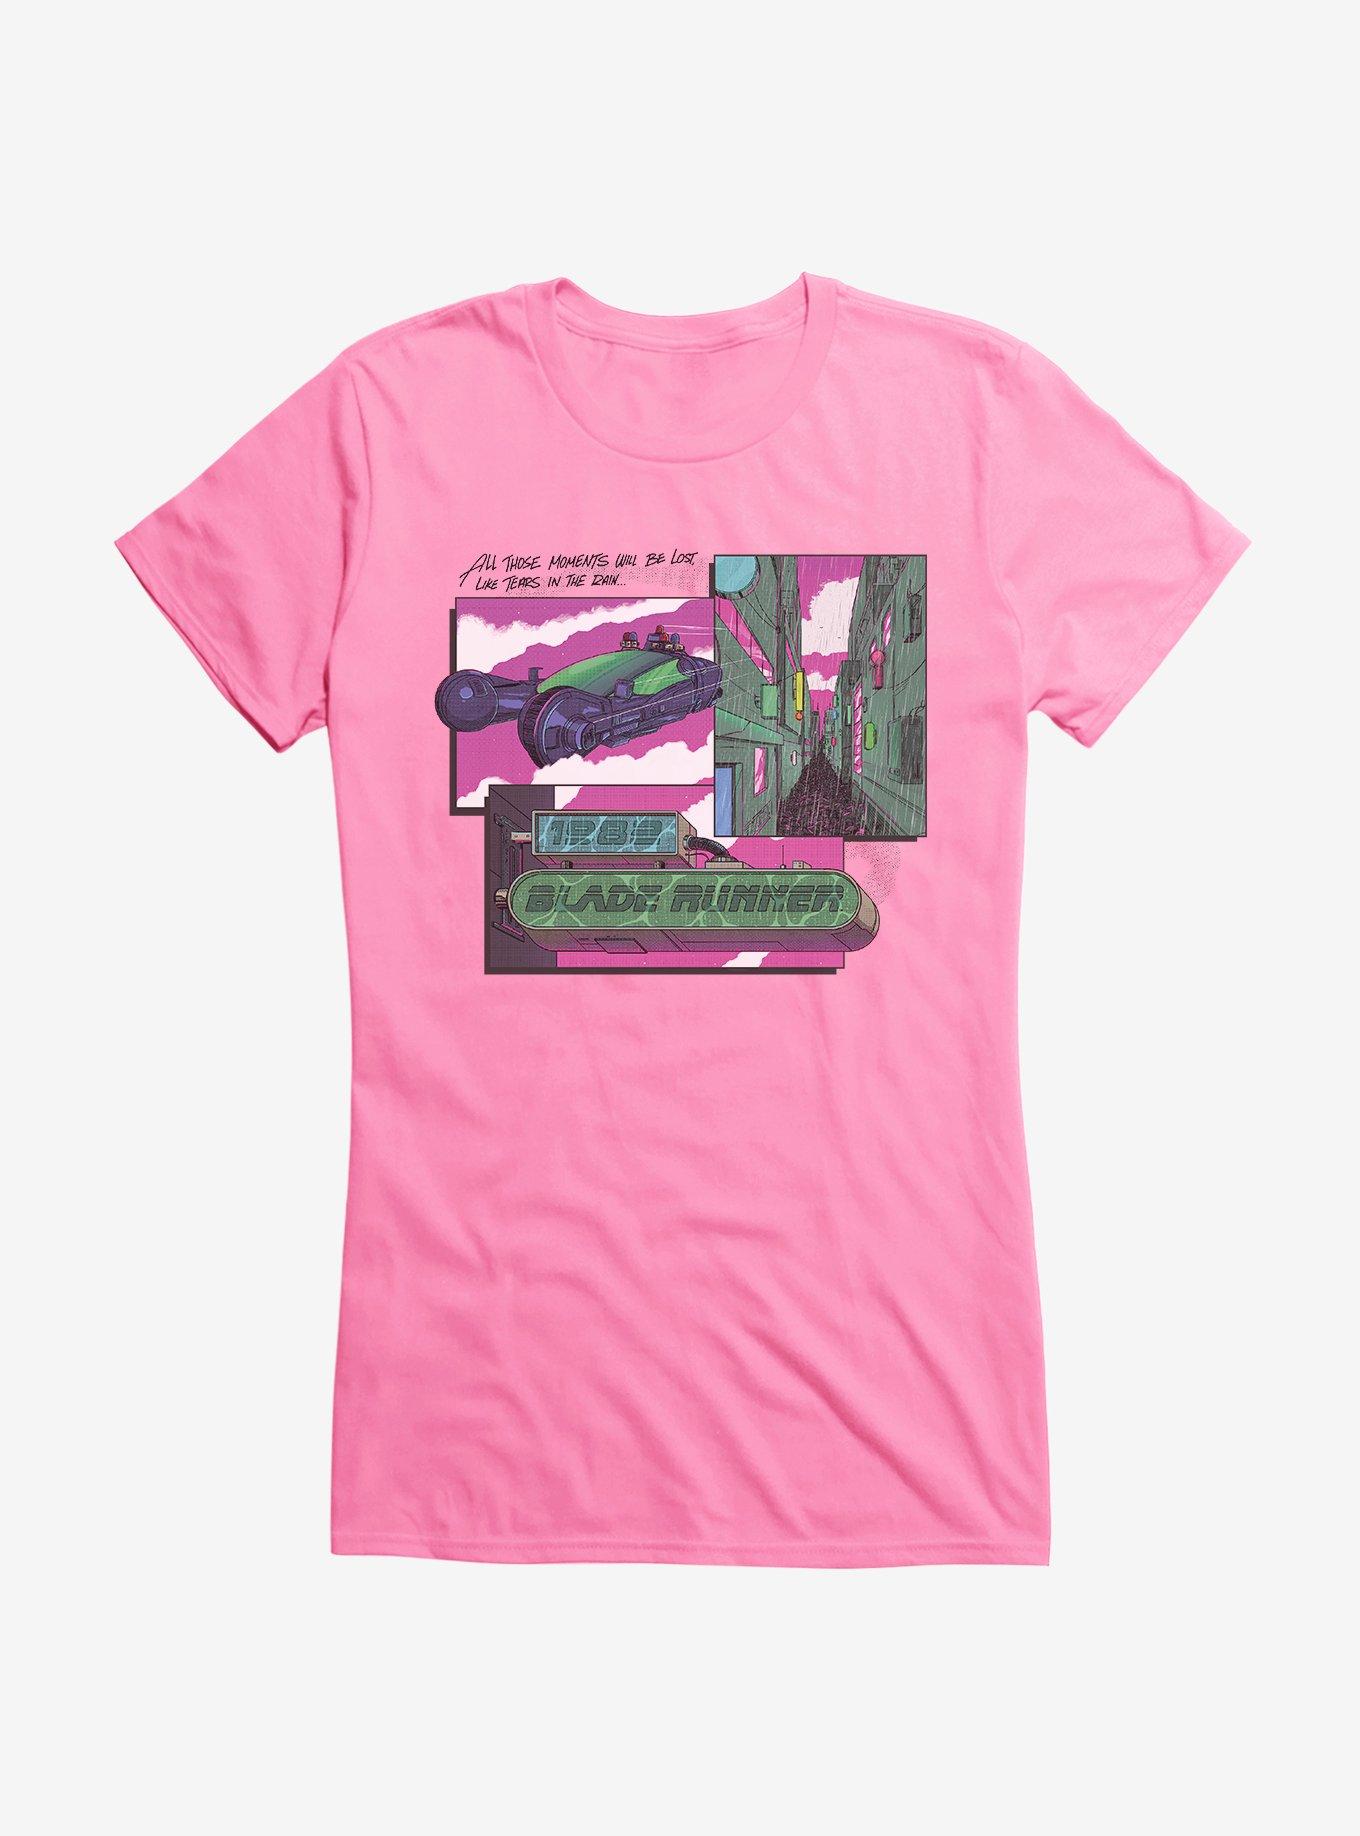 Blade Runner WB 100 All These Moments Girls T-Shirt, CHARITY PINK, hi-res